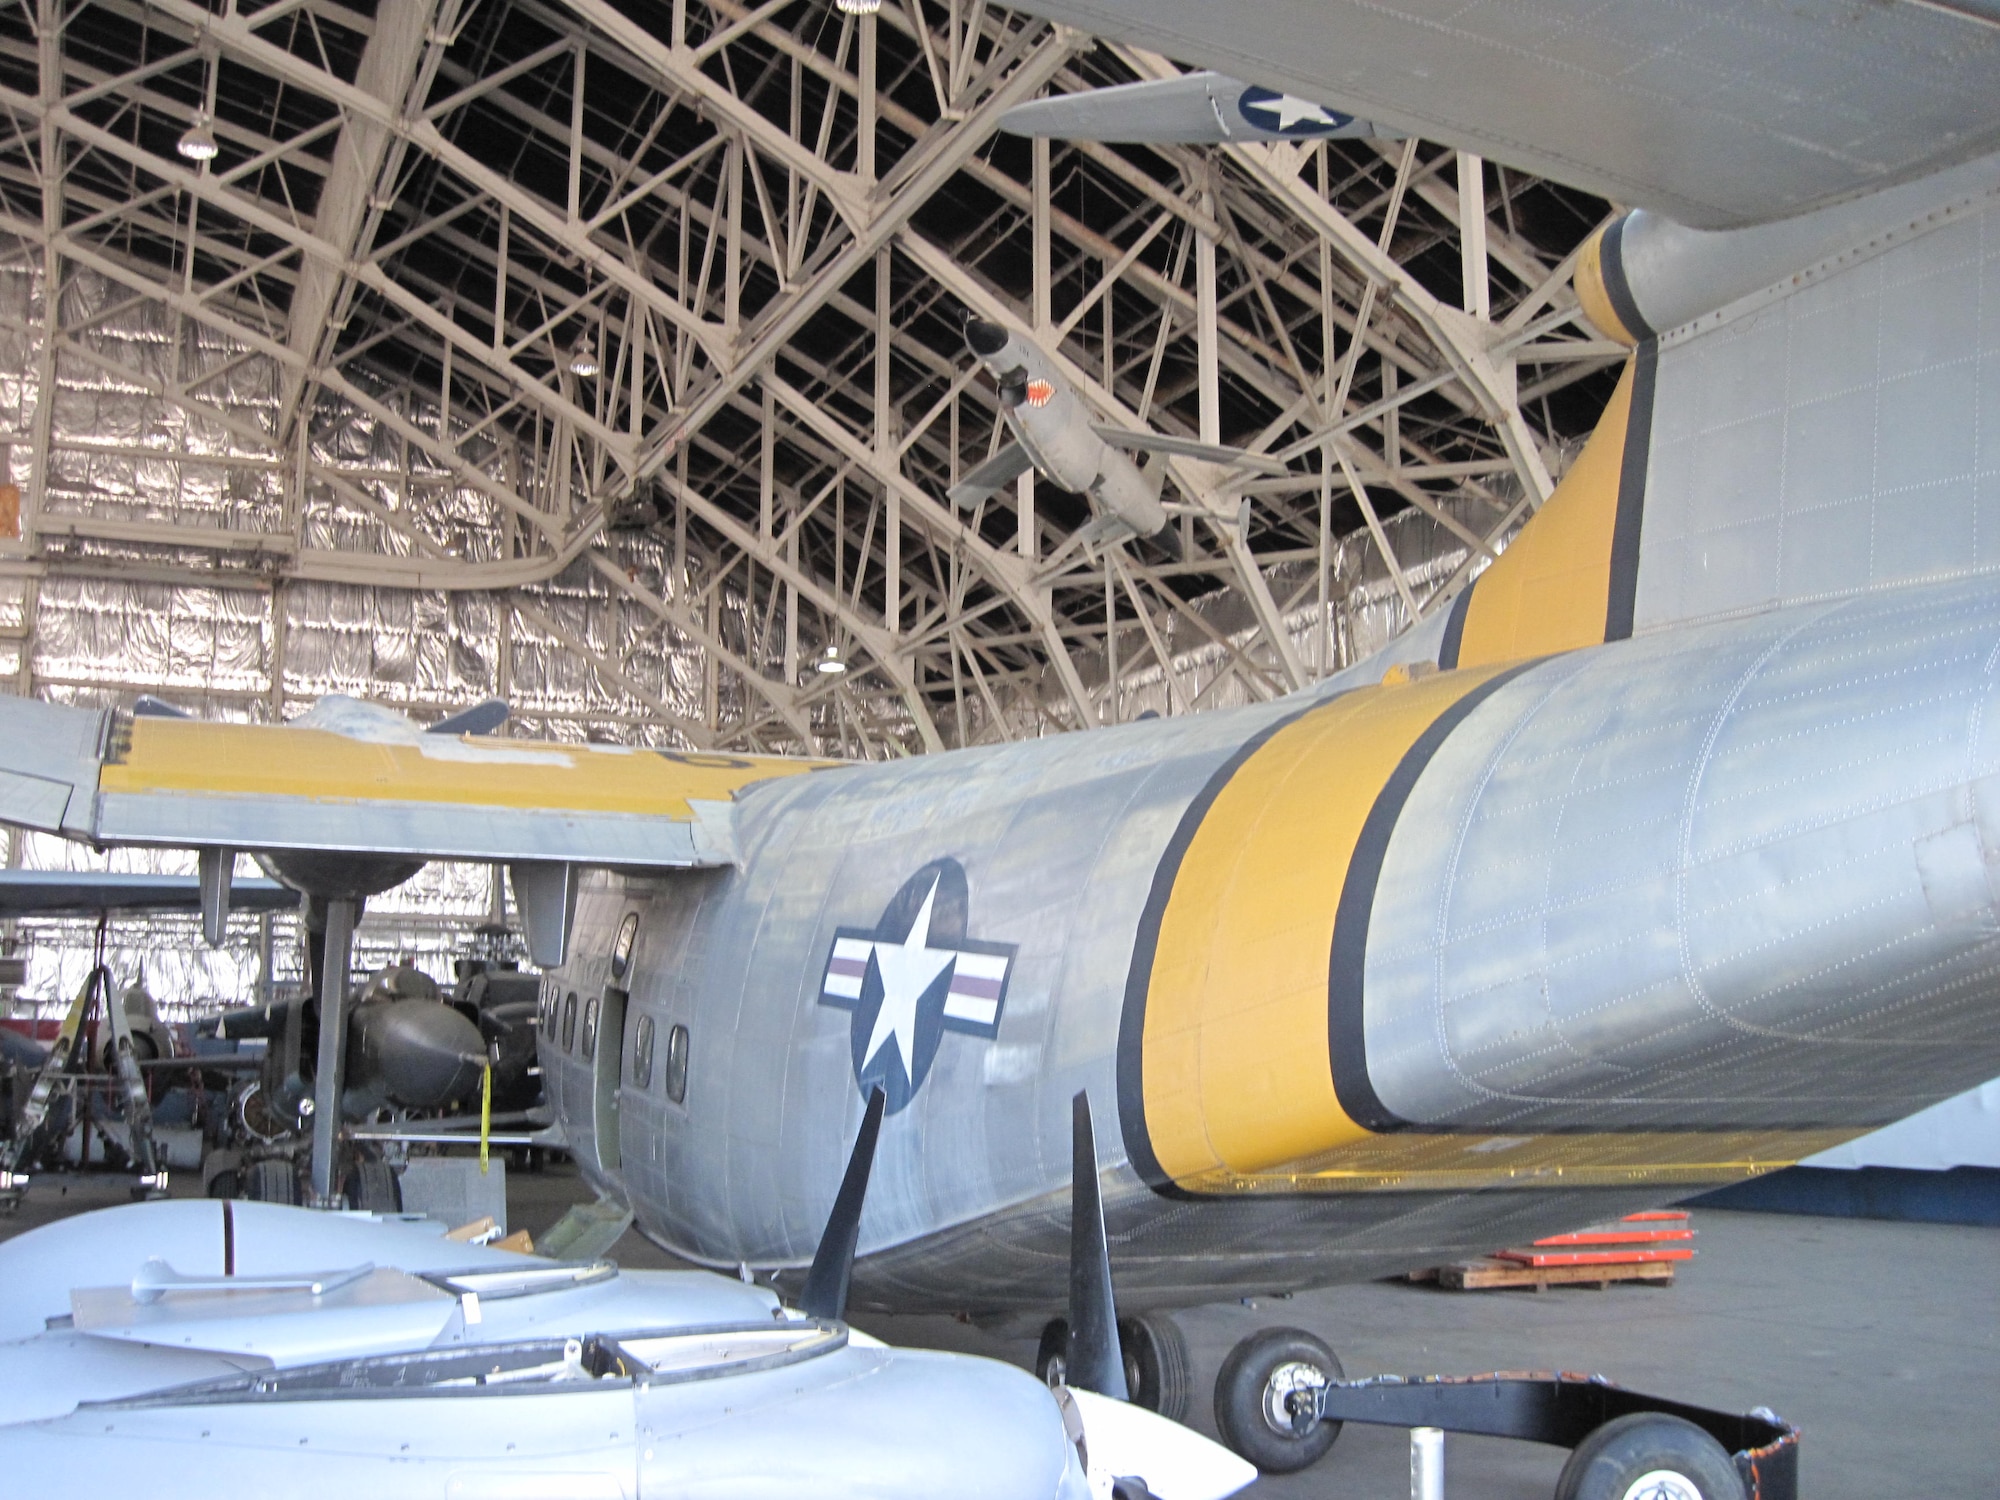 DAYTON, Ohio -- Northrop YC-125B in storage at the National Museum of the United States Air Force. (U.S. Air Force photo)